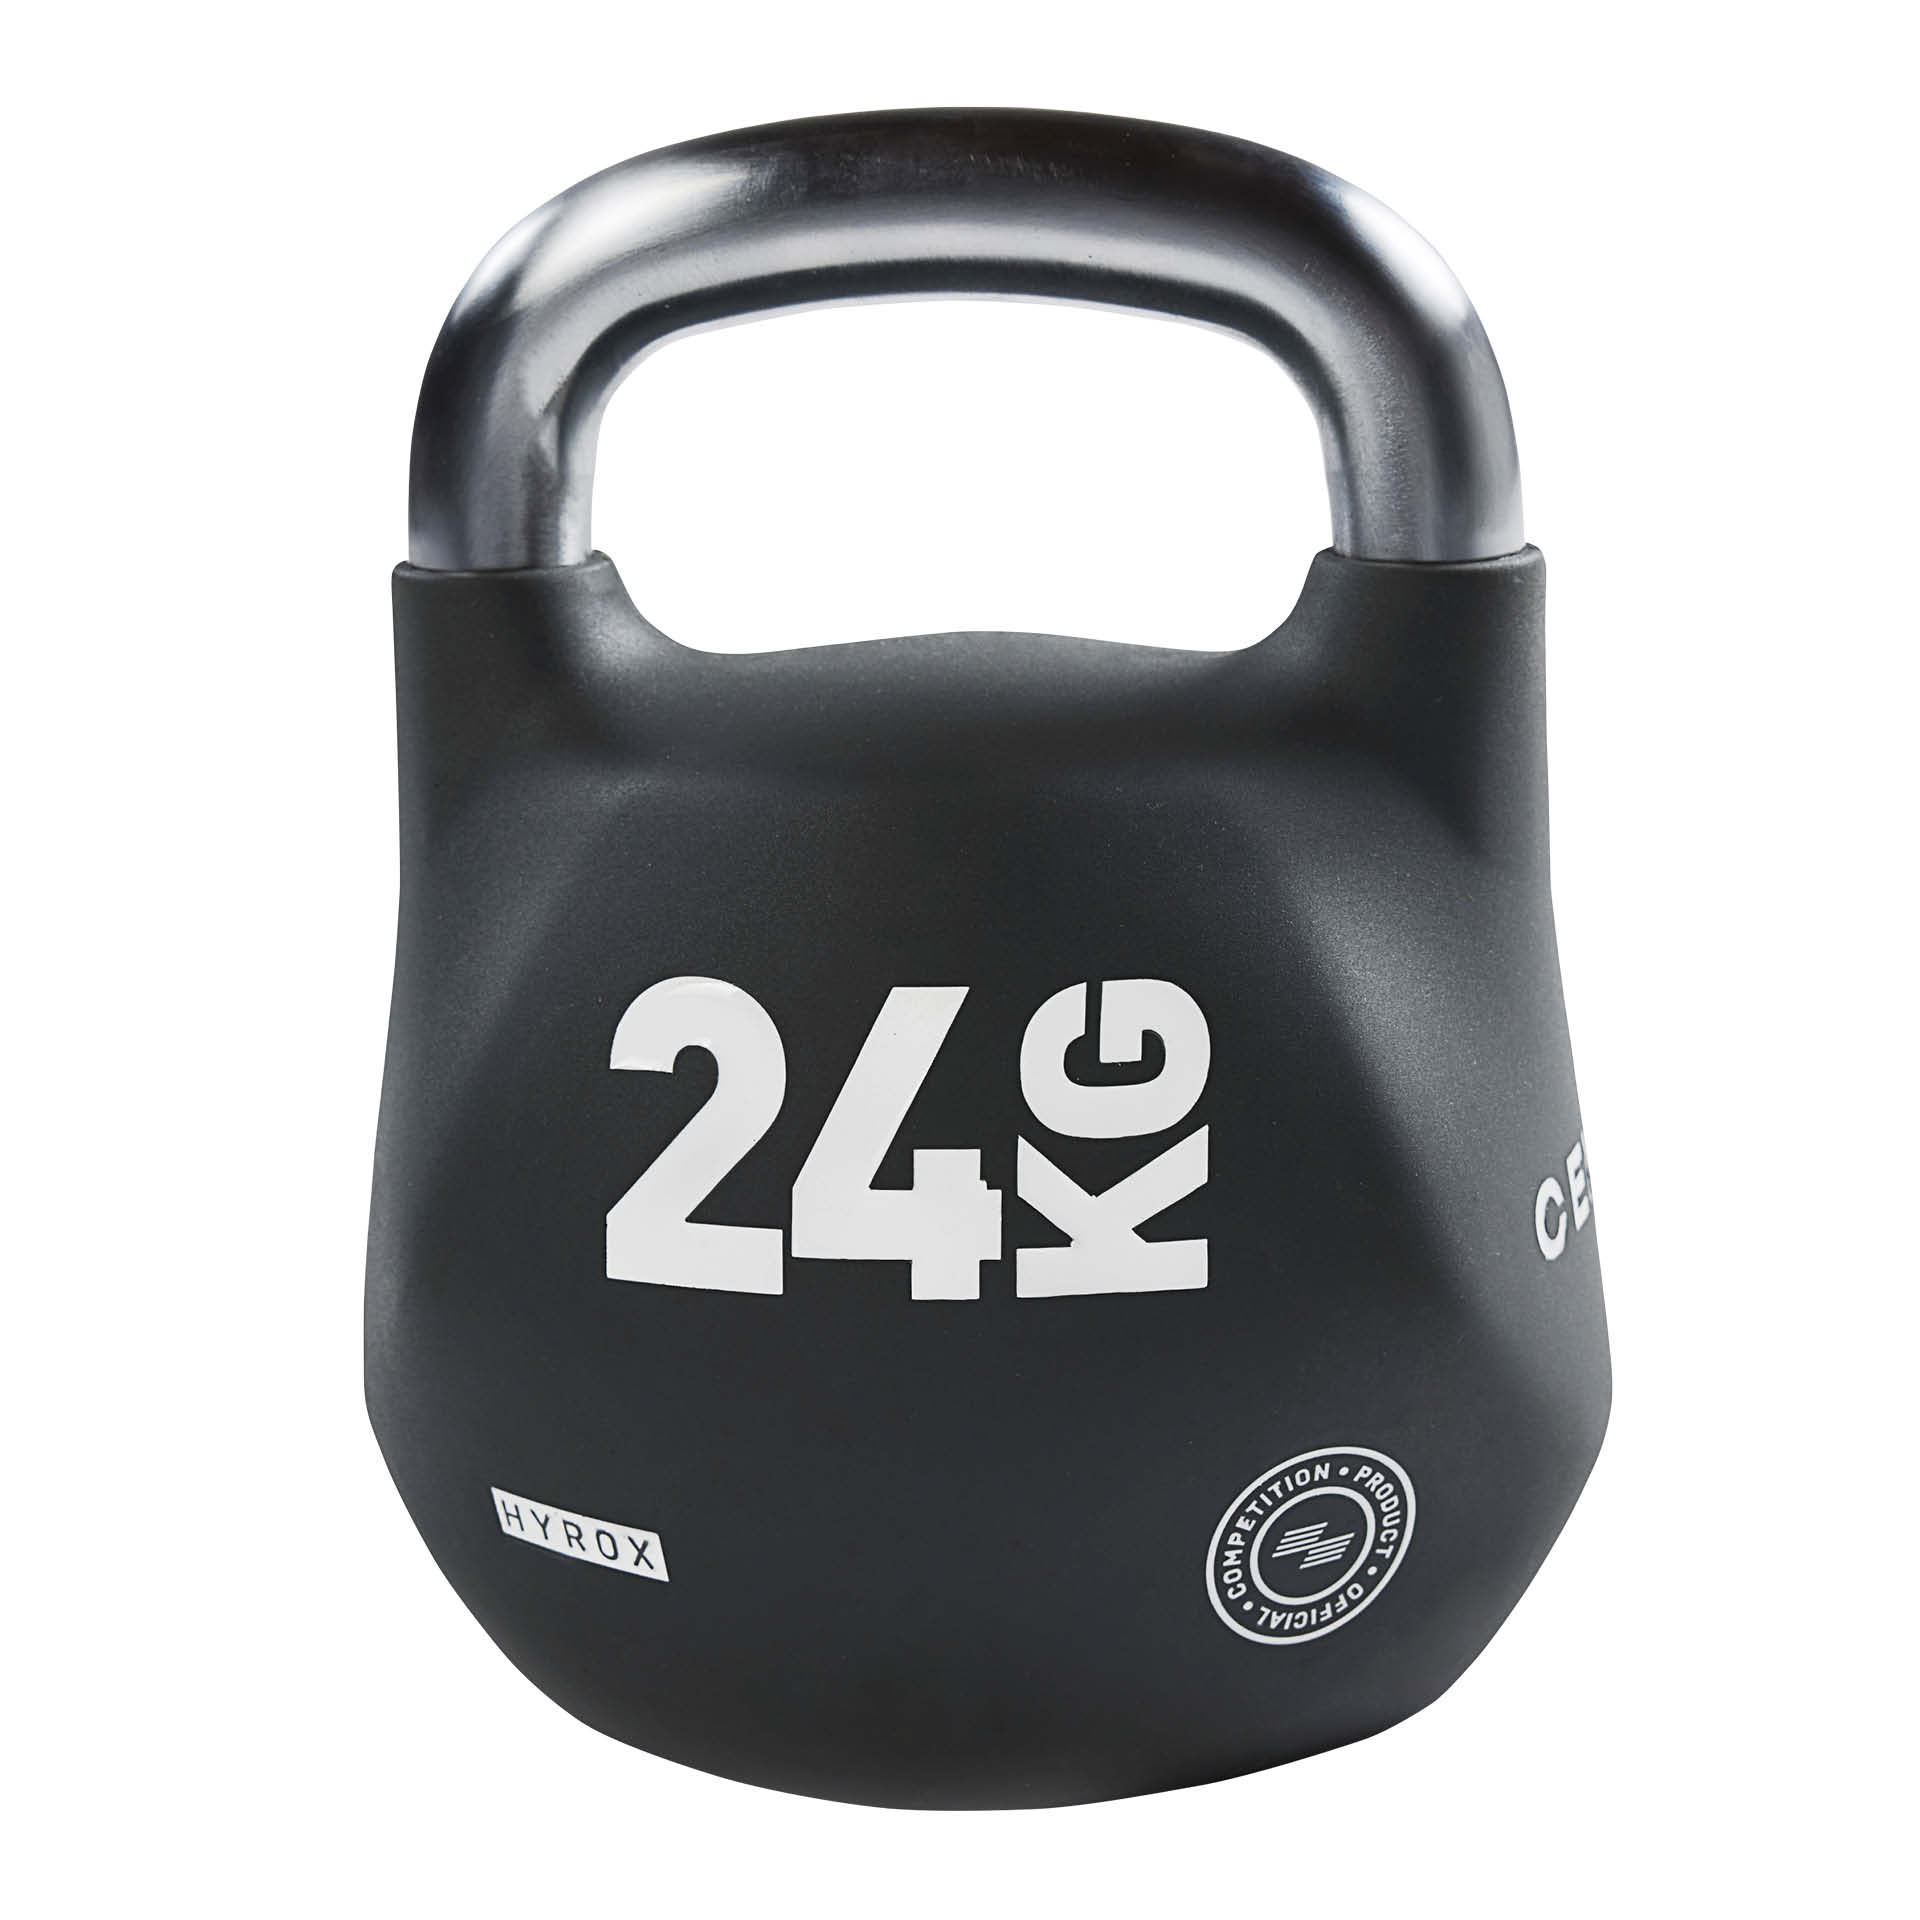 CENTR x HYROX Competition Octo Kettlebell 24 kg